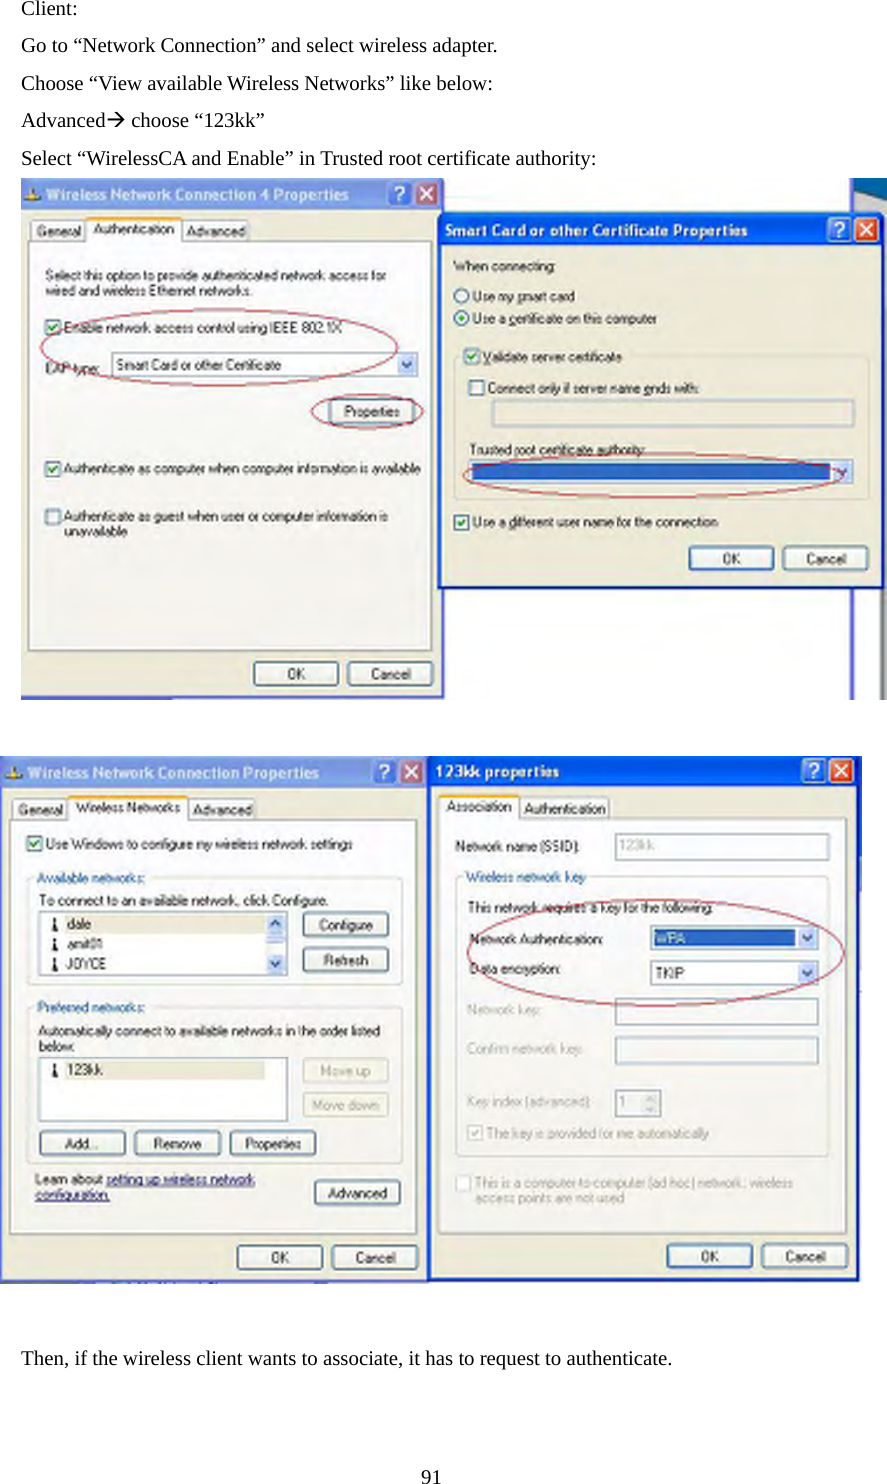 Client: Go to “Network Connection” and select wireless adapter. Choose “View available Wireless Networks” like below: AdvancedÆ choose “123kk” Select “WirelessCA and Enable” in Trusted root certificate authority:            Then, if the wireless client wants to associate, it has to request to authenticate.         91